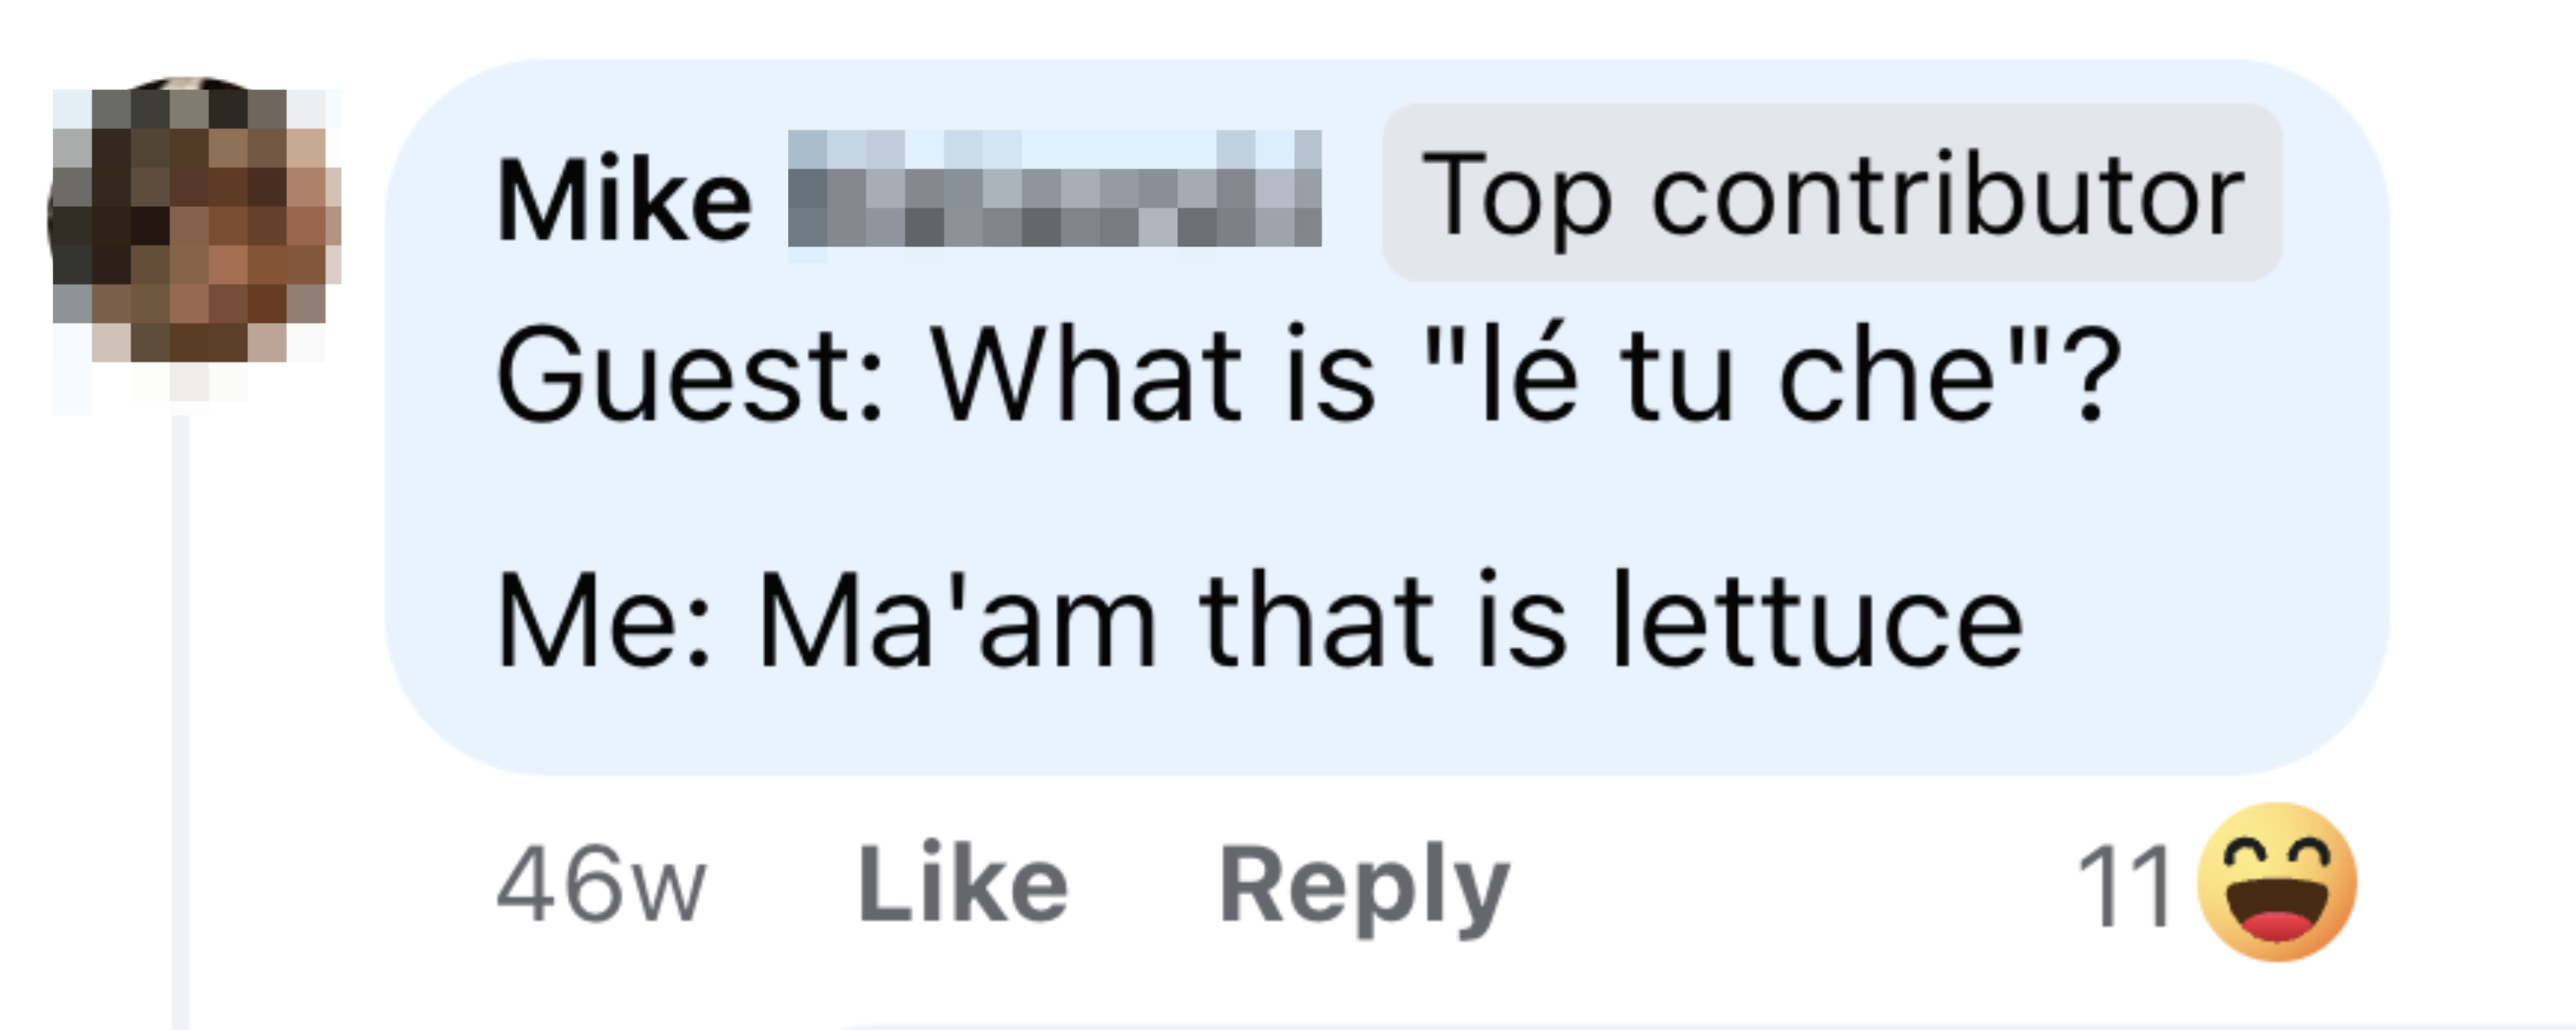 A screenshot of a social media comment where a user jokes about confusing &#x27;lettuce&#x27; with &#x27;l&#x27;e tu che&#x27;